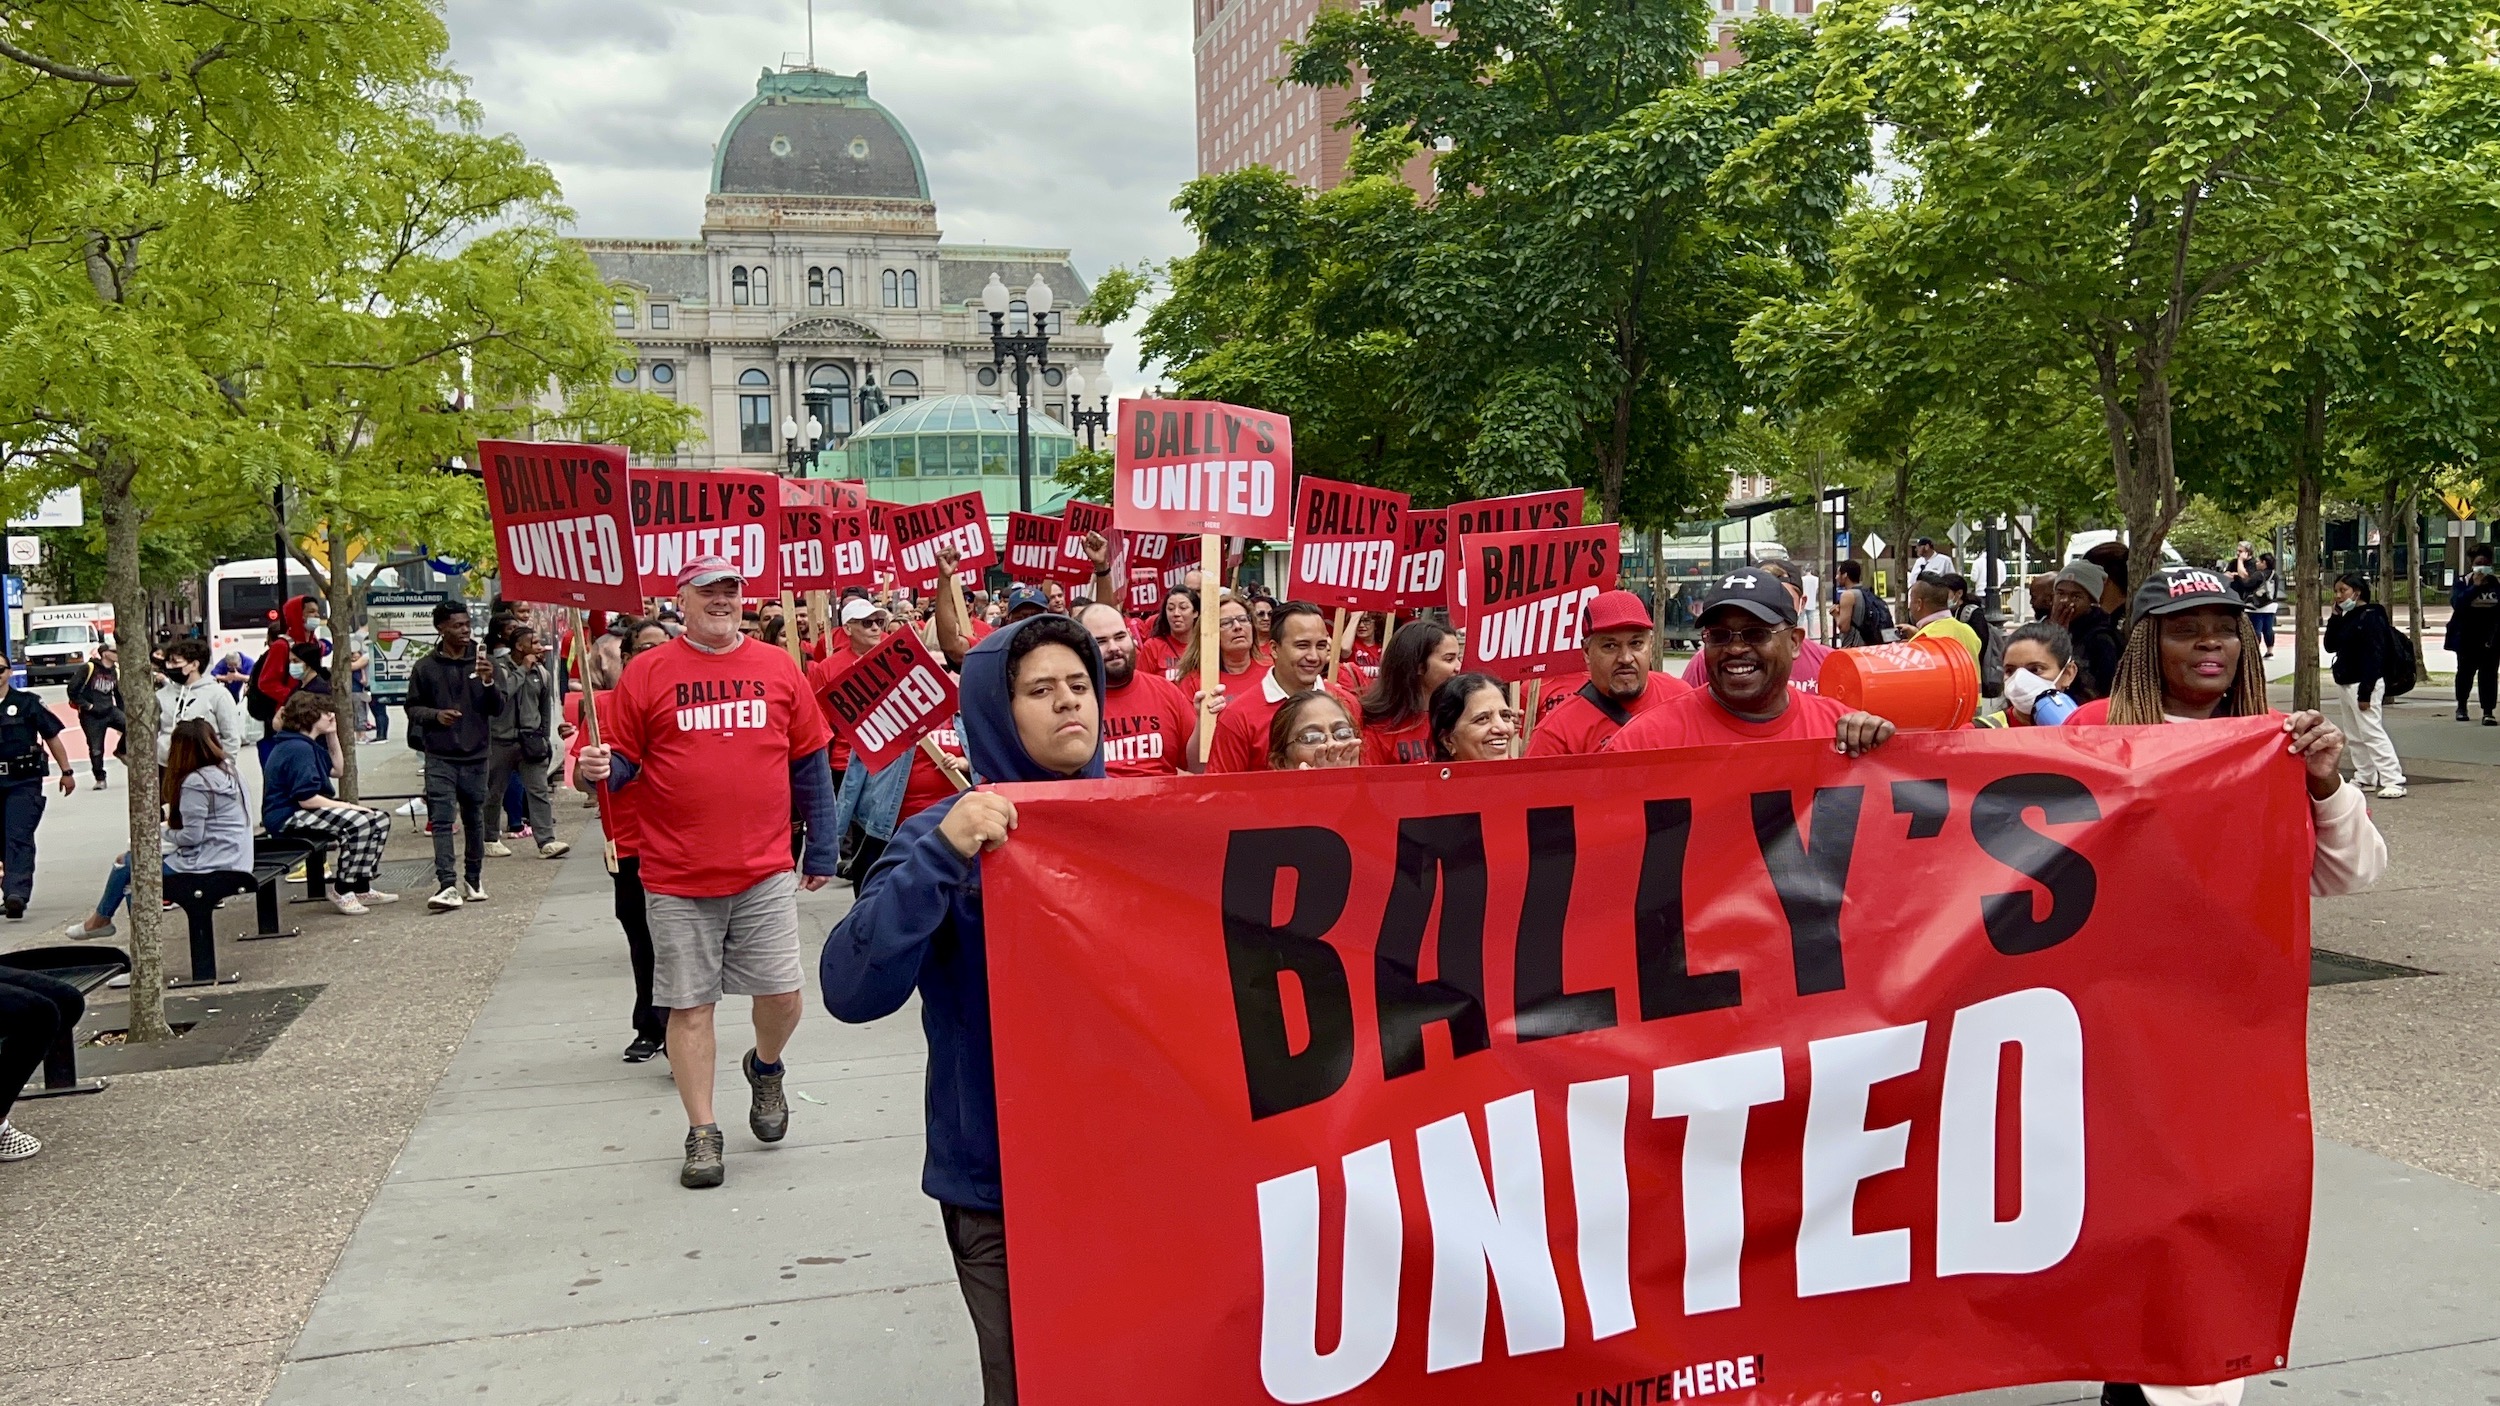 Rhode Island: Casino workers rally and march to Bally’s HQ in Providence to demand full staffing and substantial raises